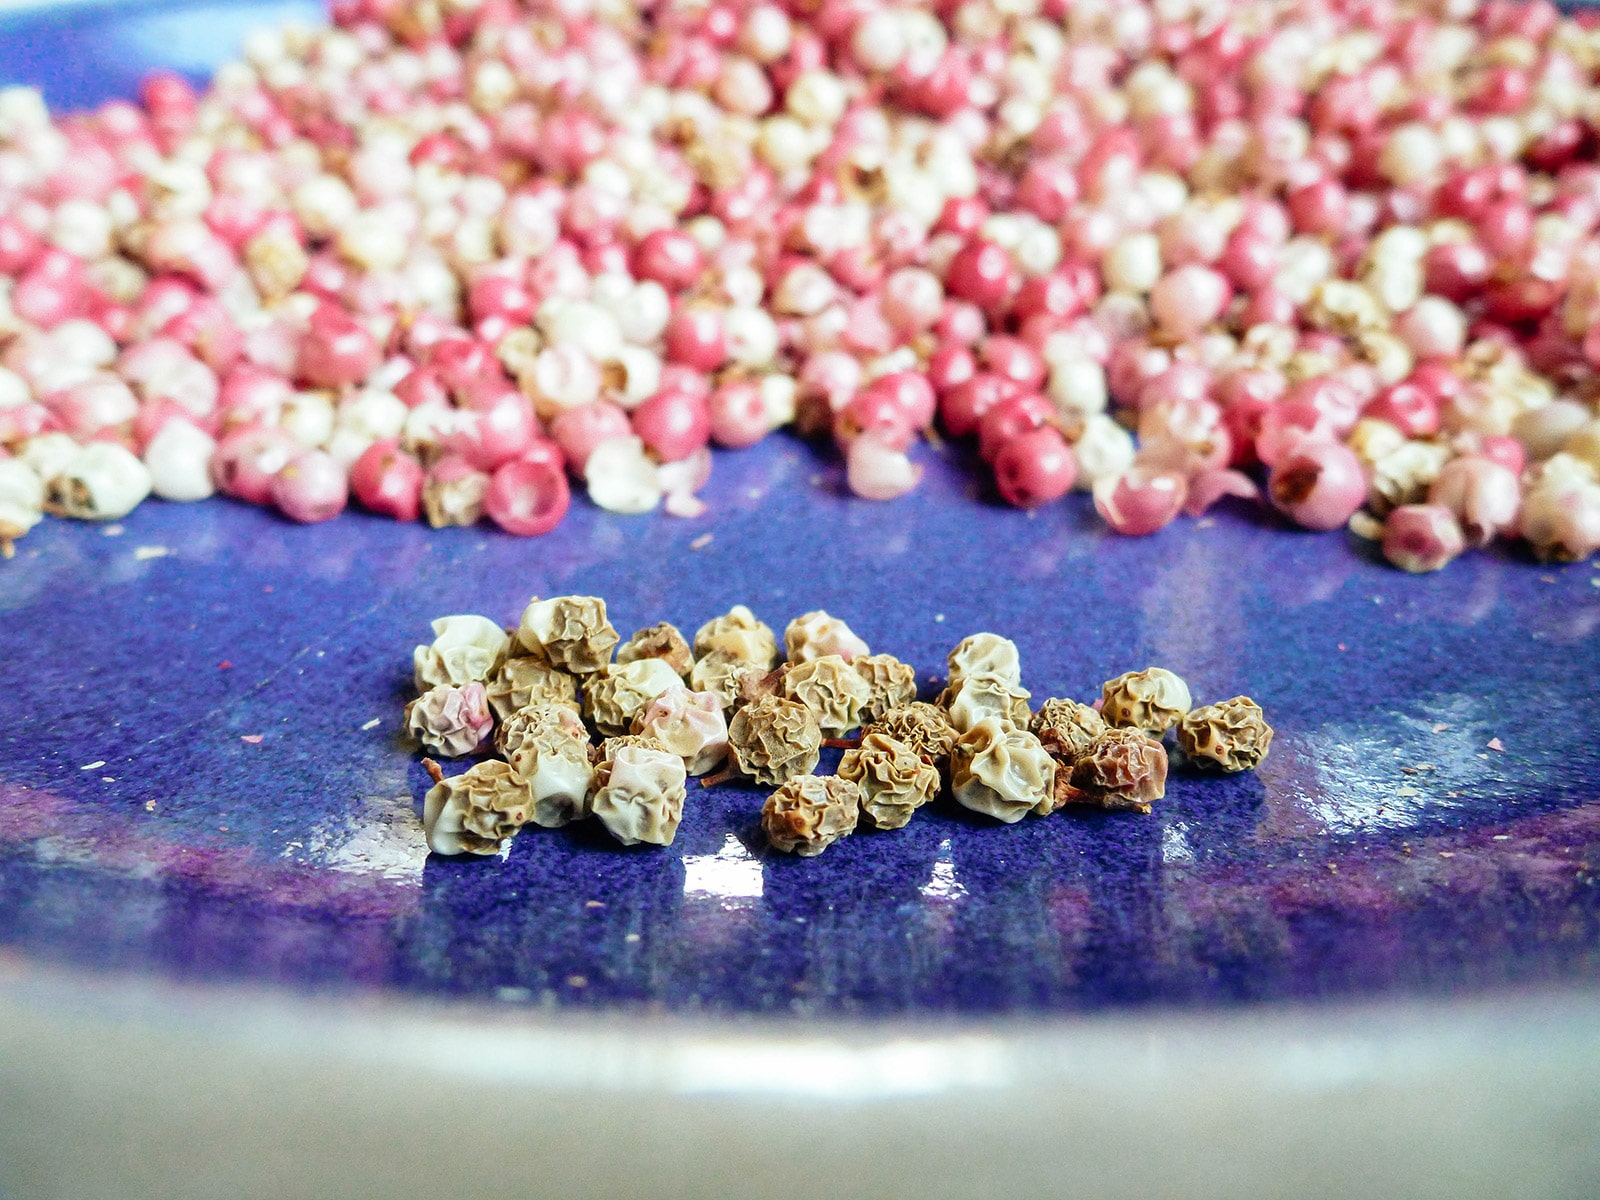 Peruvian pink peppercorns with hardened and shriveled tan shells